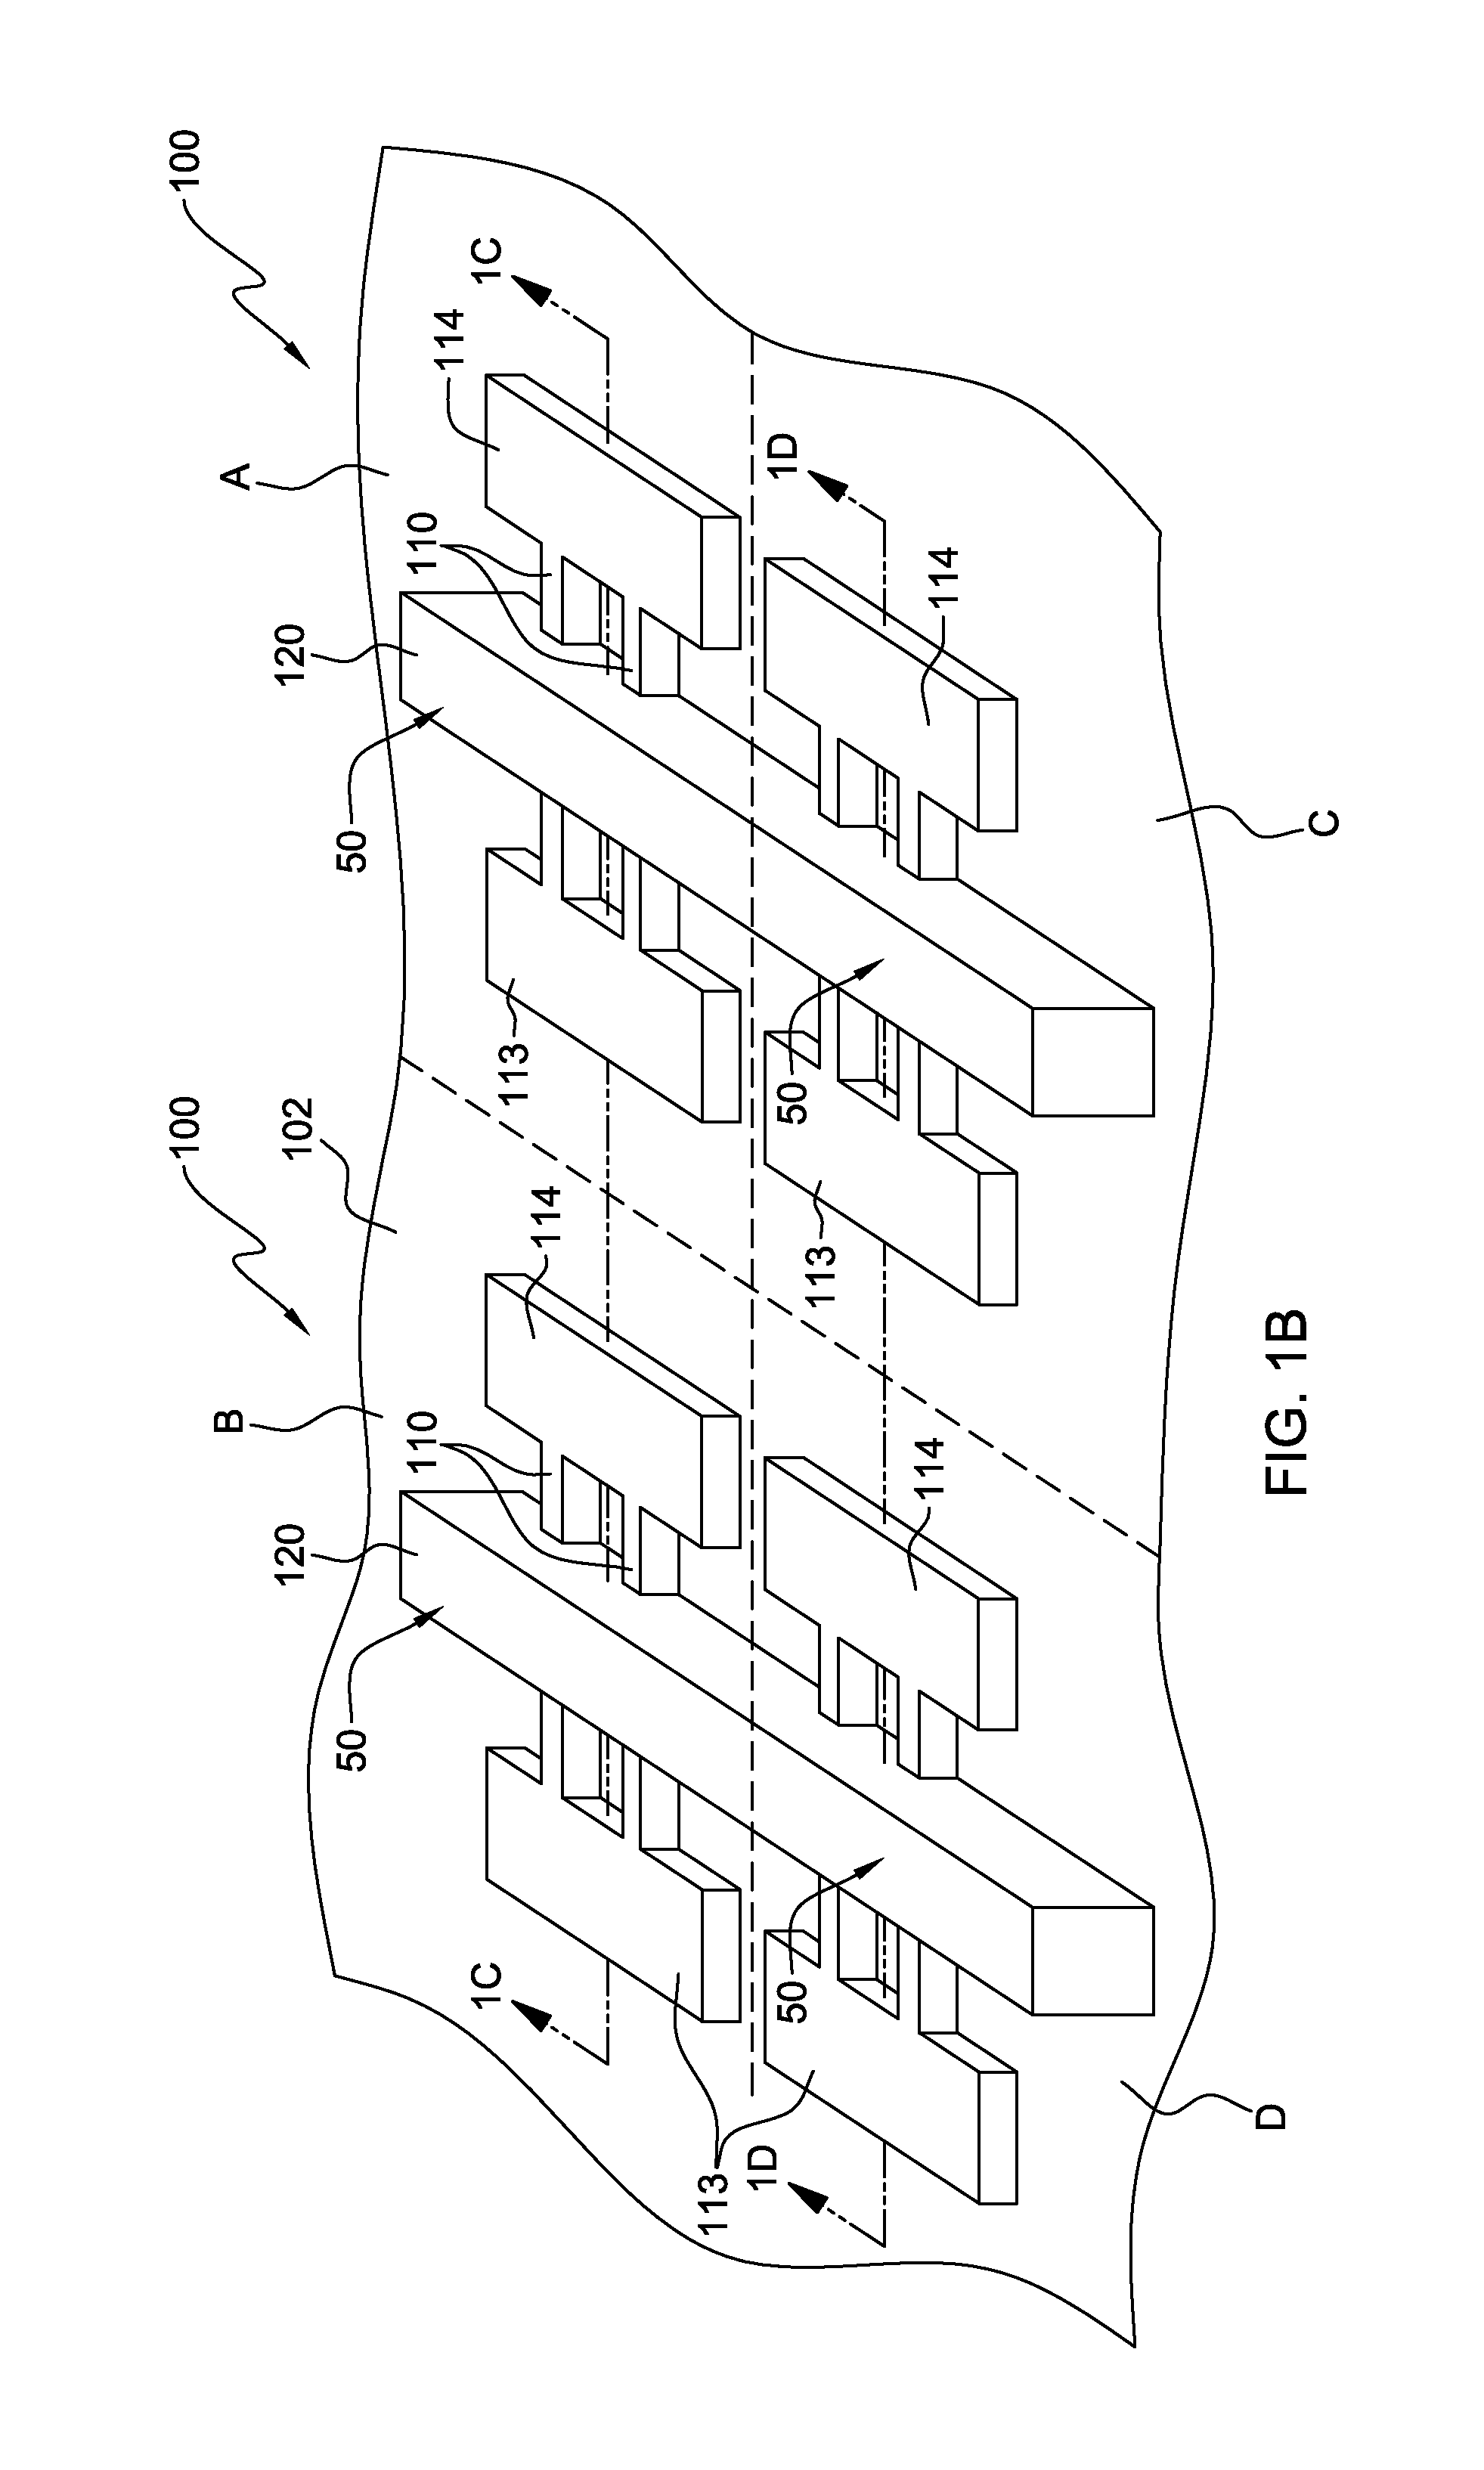 Integrated circuit having multiple threshold voltages